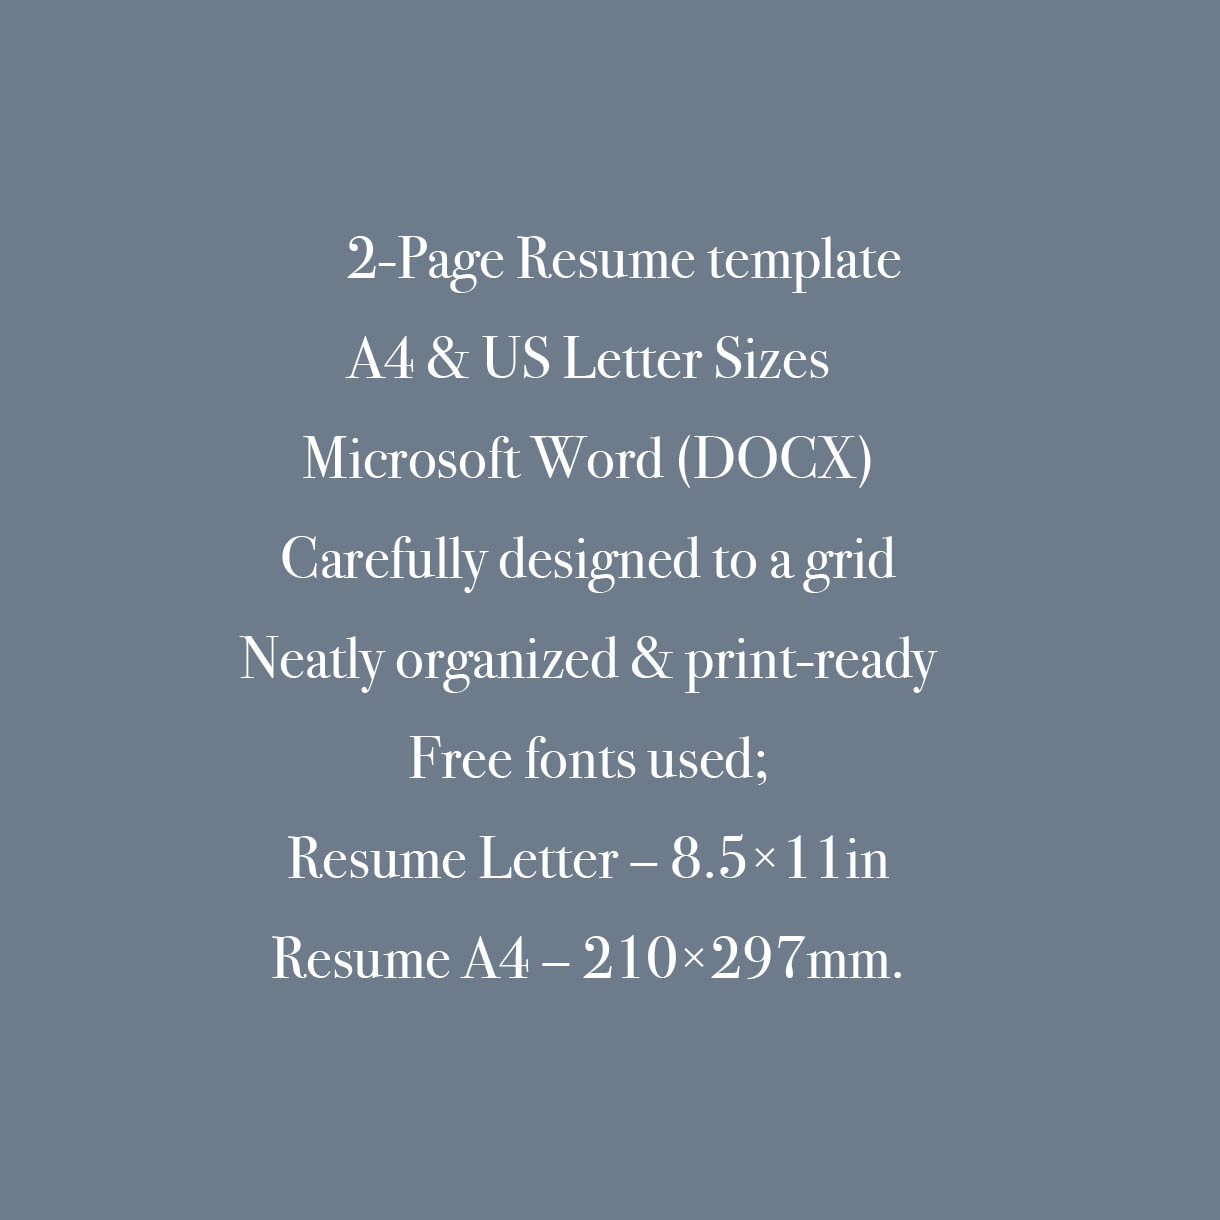 Resume template with a blue background.